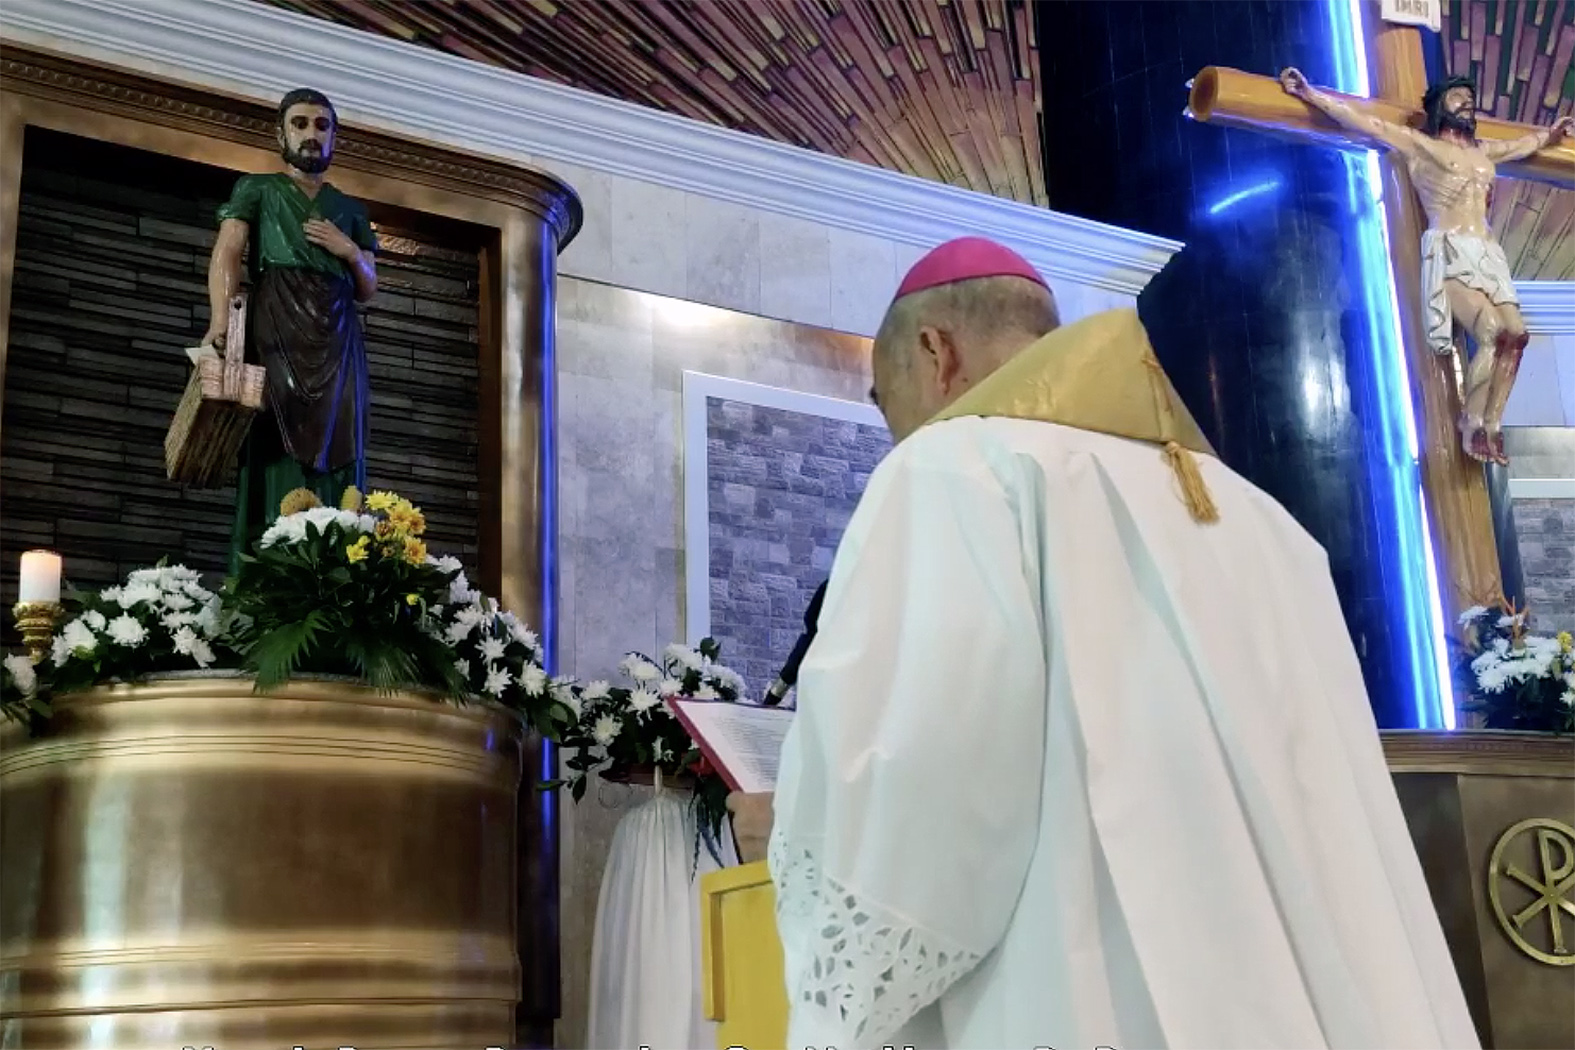 Filipino families to be consecrated to St. Joseph